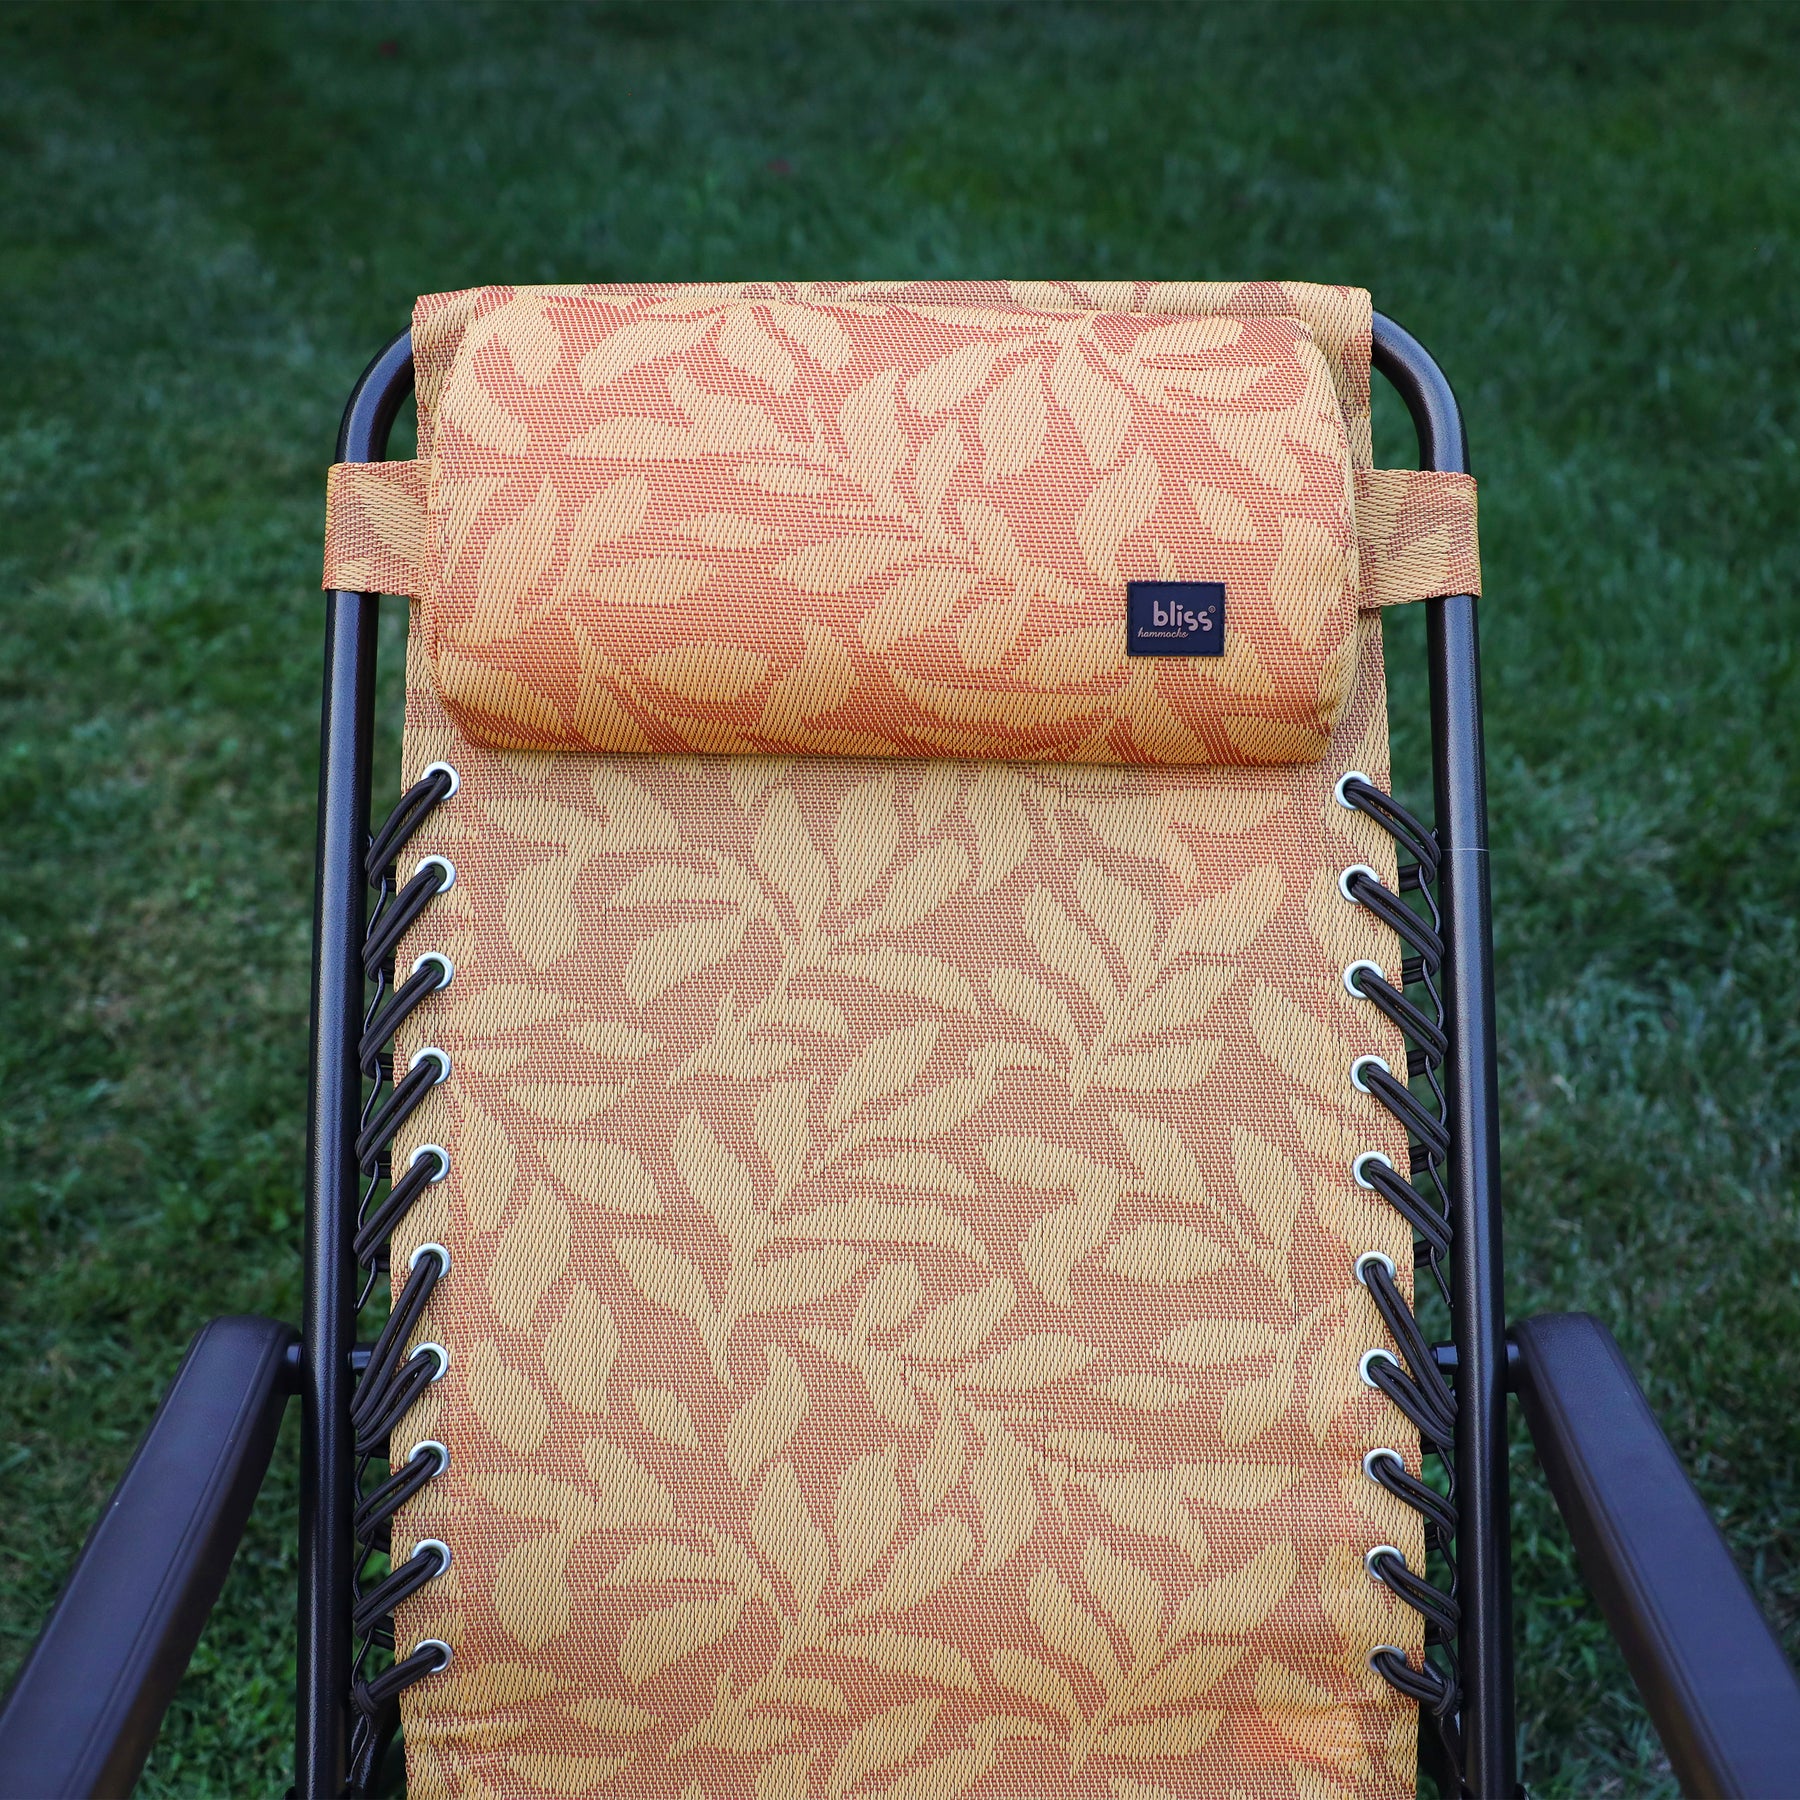 Close-up of the back rest and pillow on the 26-inch Reclining Amber Leaf Sling Chair.